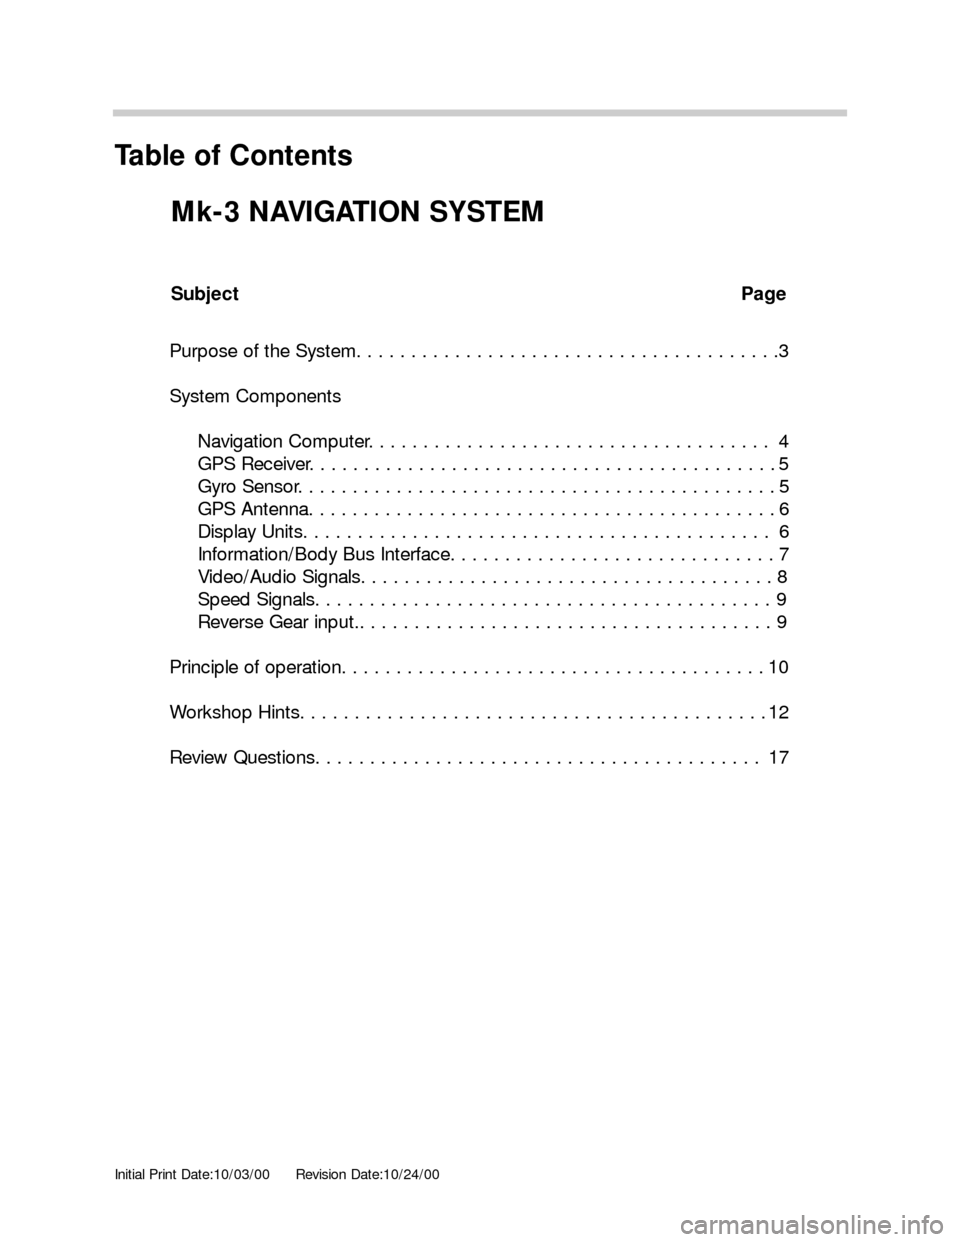 BMW X5 2006 E53 Mk3 Navigation System Manual Initial Print Date:10/03/00Revision Date:10/24/00
Subject Page
Purpose of the System. . . . . . . . . . . . . . . . . . . . . . . . . . . . . . . . . . . . . . .3
System Components
Navigation Computer